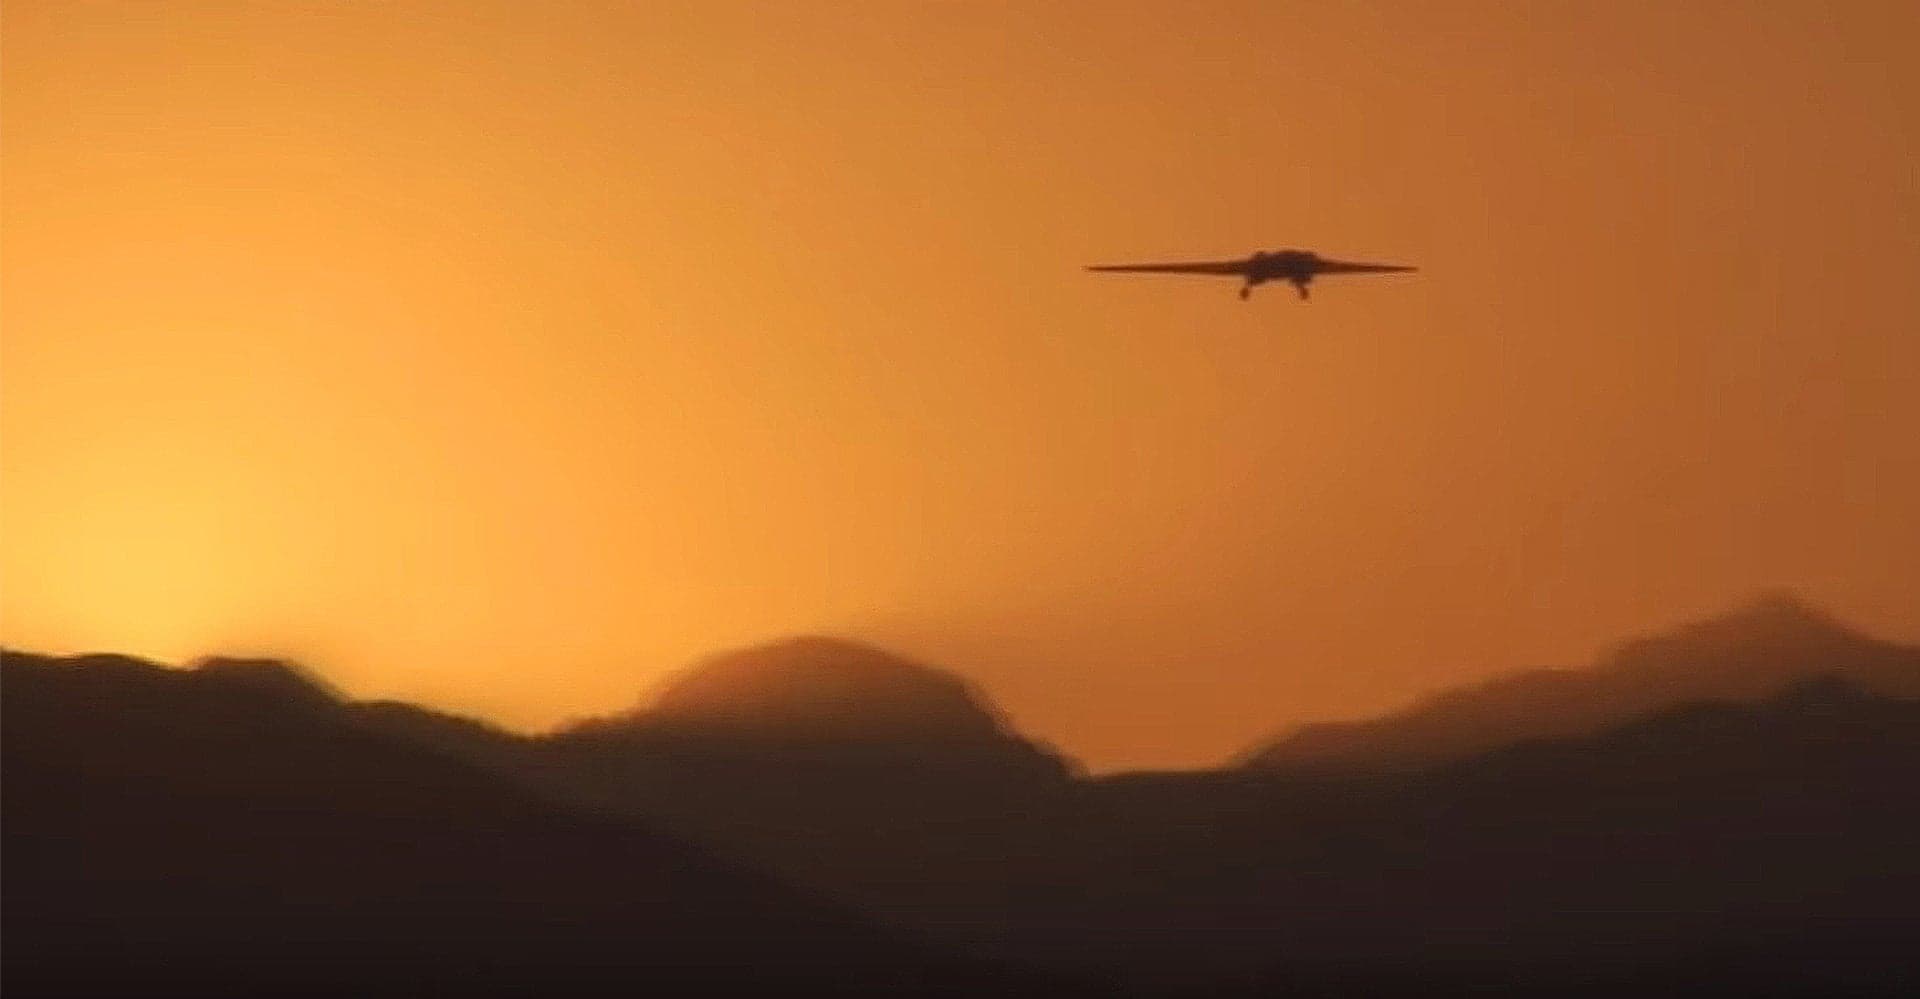 Rare Video of an RQ-170 Sentinel Making a Low Approach at Dawn Is Both Spooky And Glorious